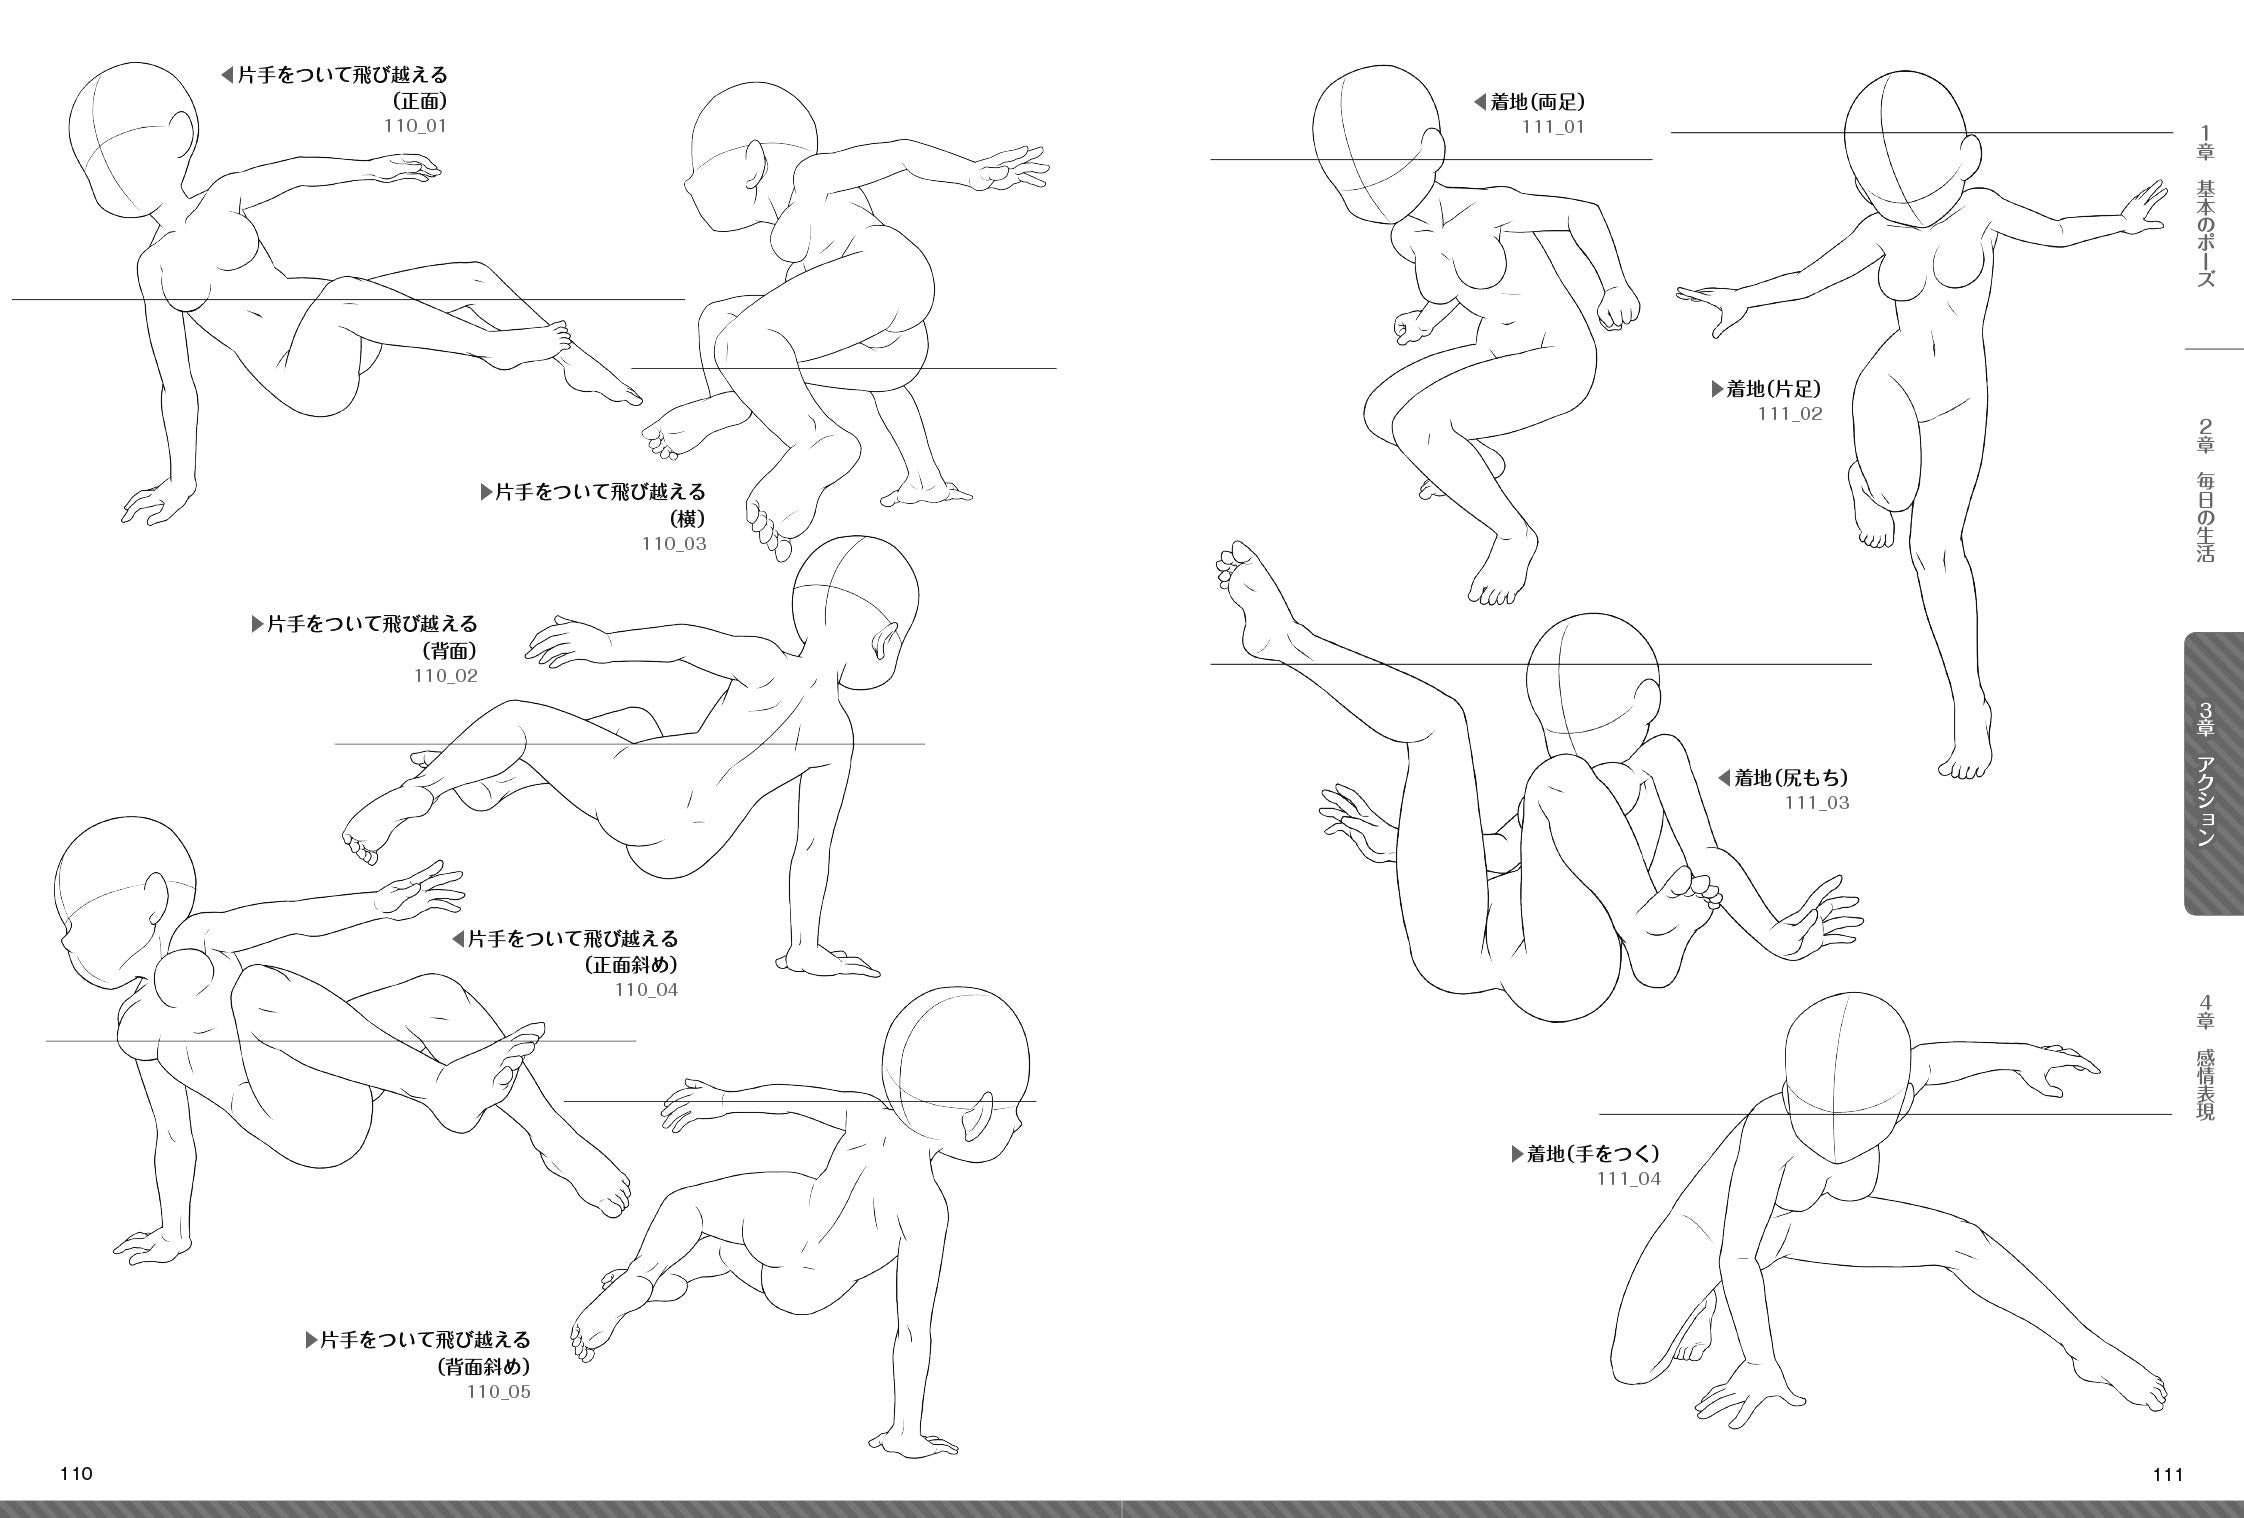 sketches poses gesture | reference for modelling | Flickr